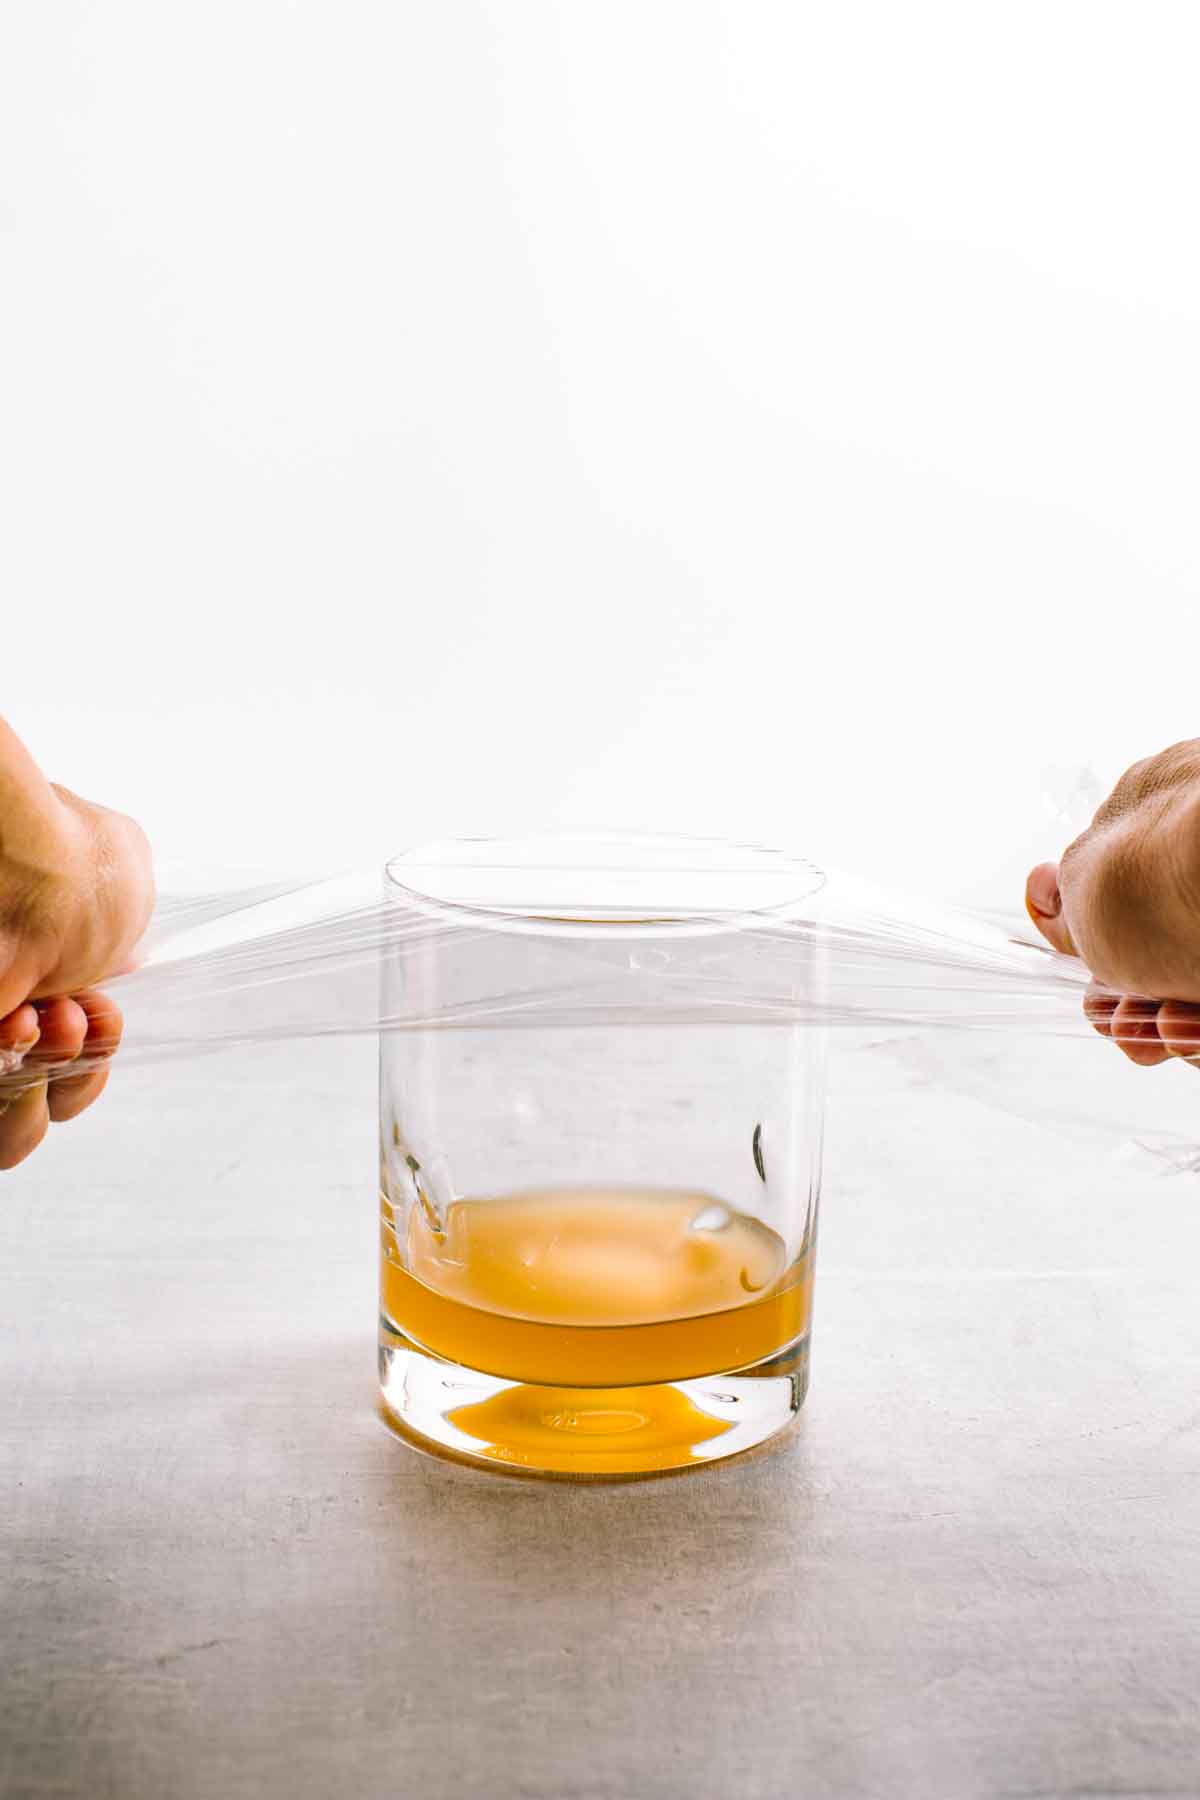 Hands placing plastic wrap on a glass filled with amber liquid.